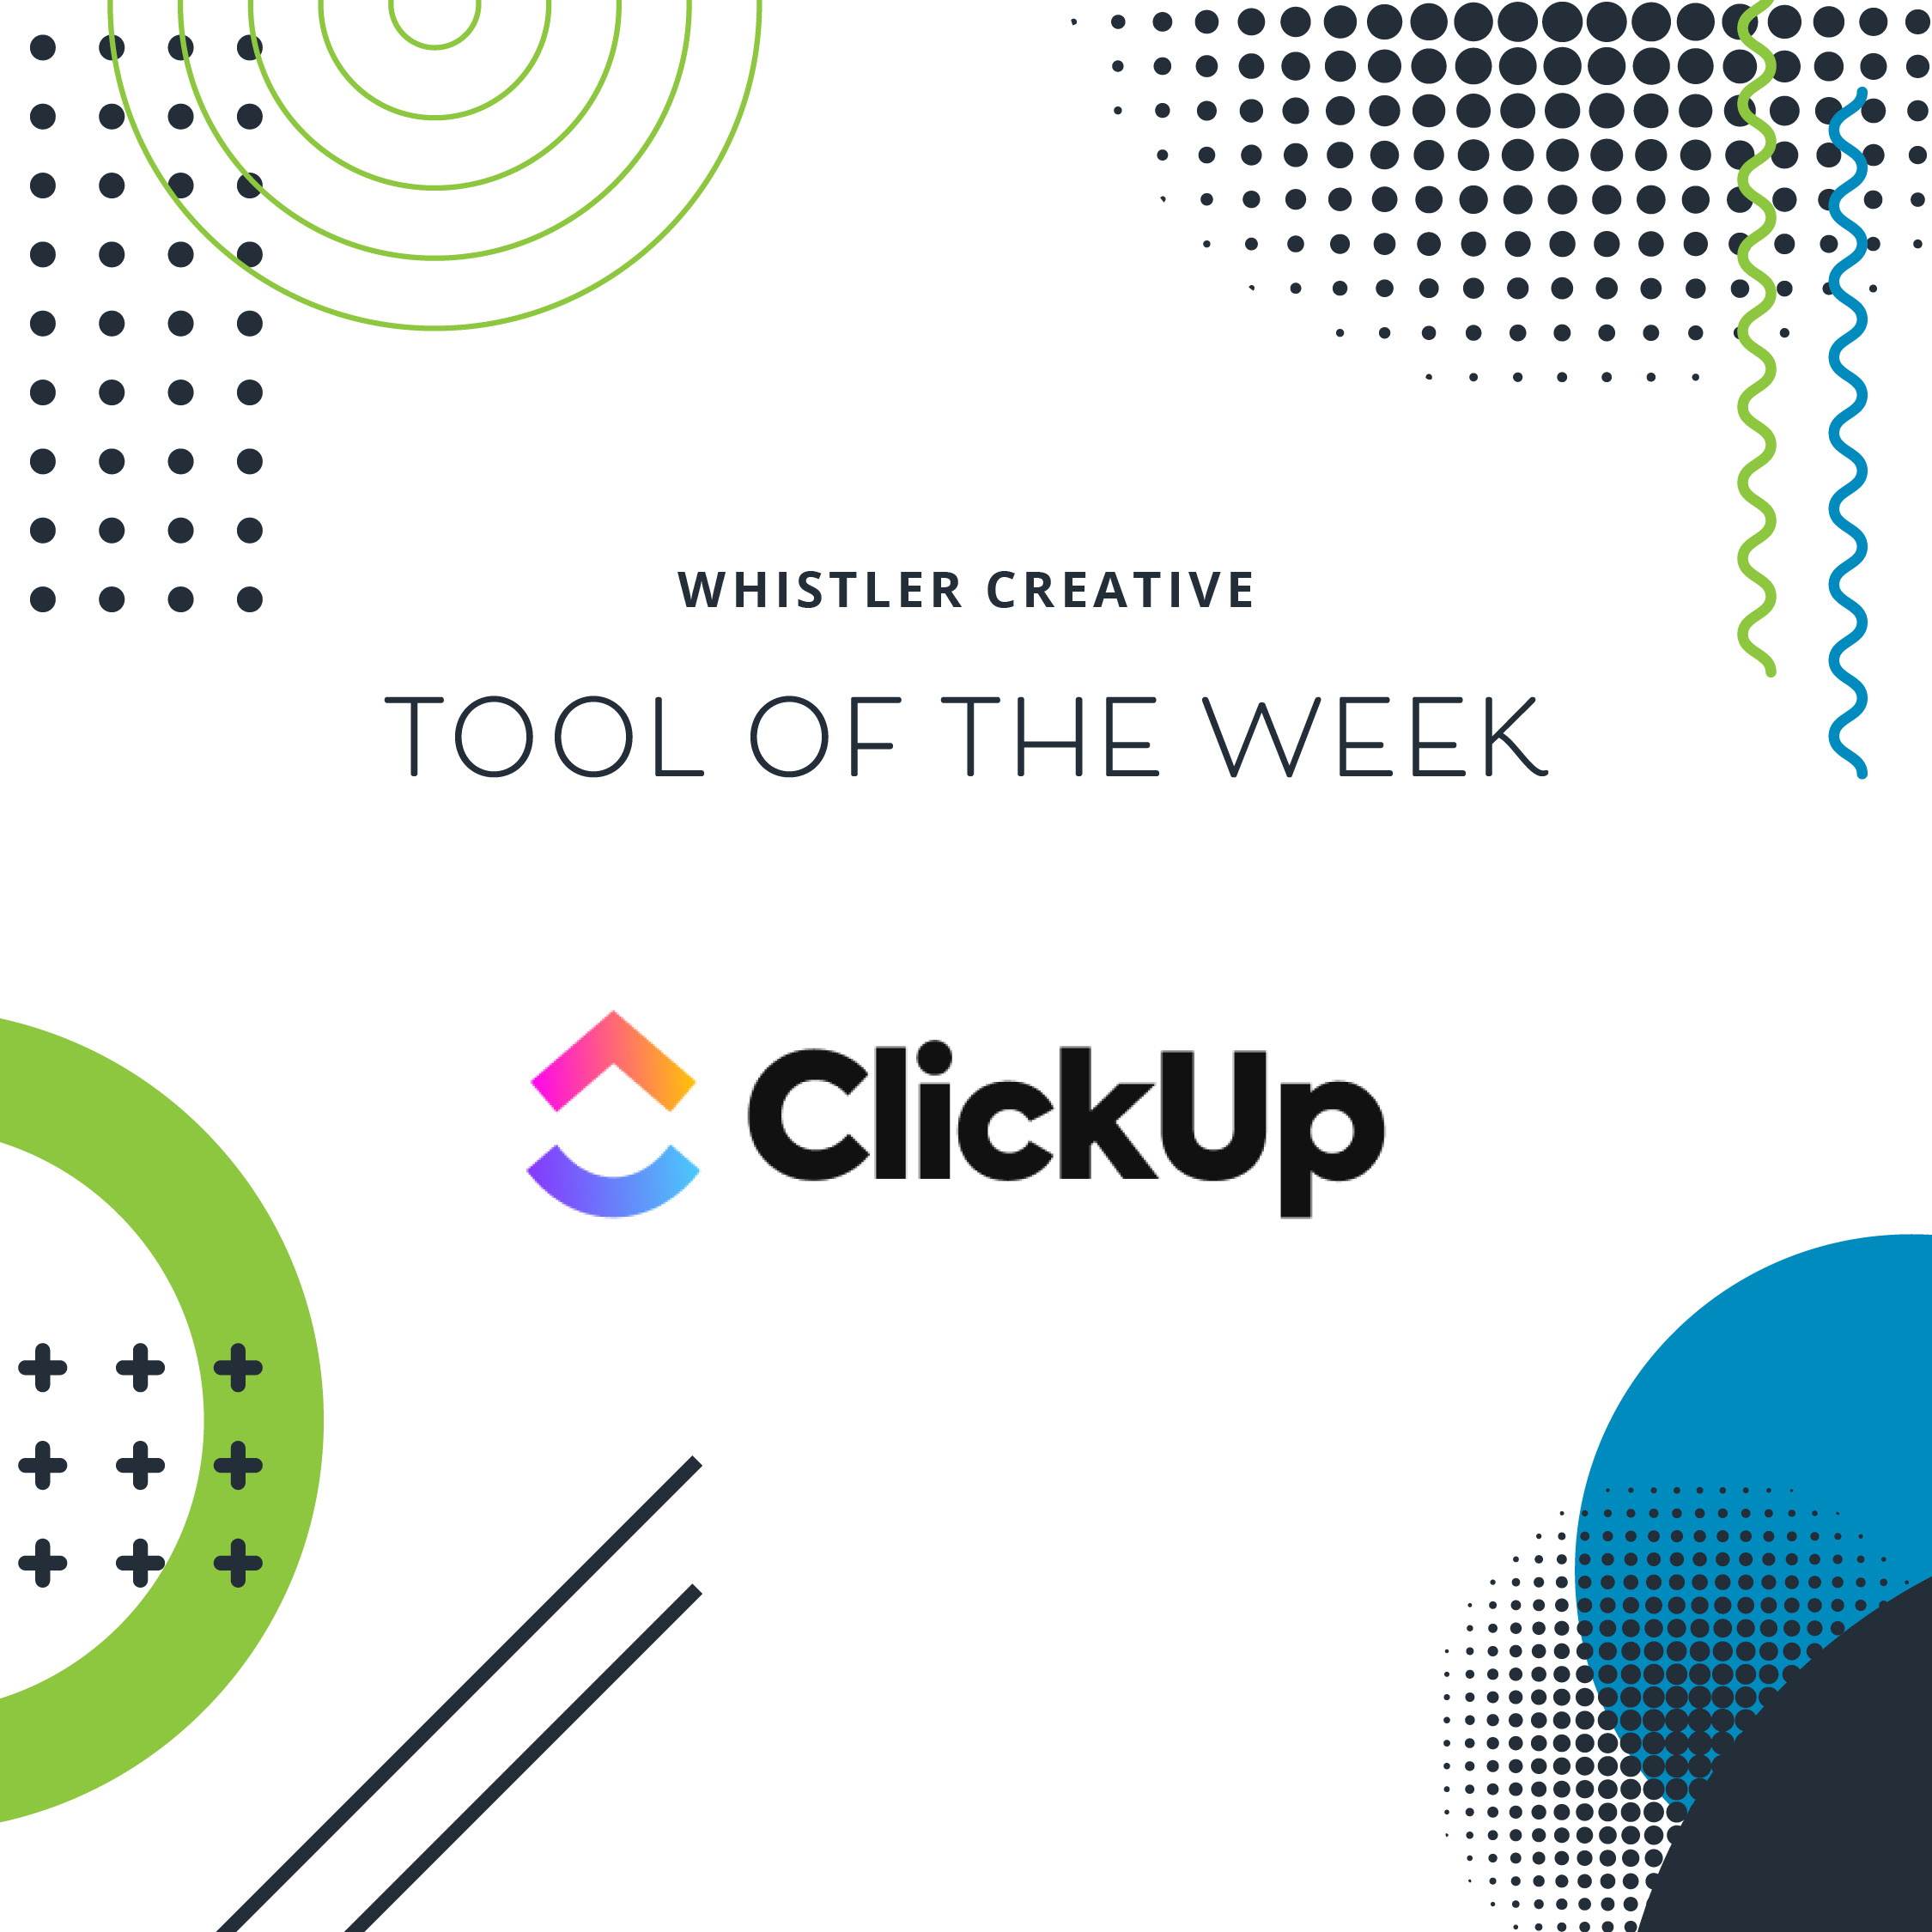 Save one day every week with ClickUp